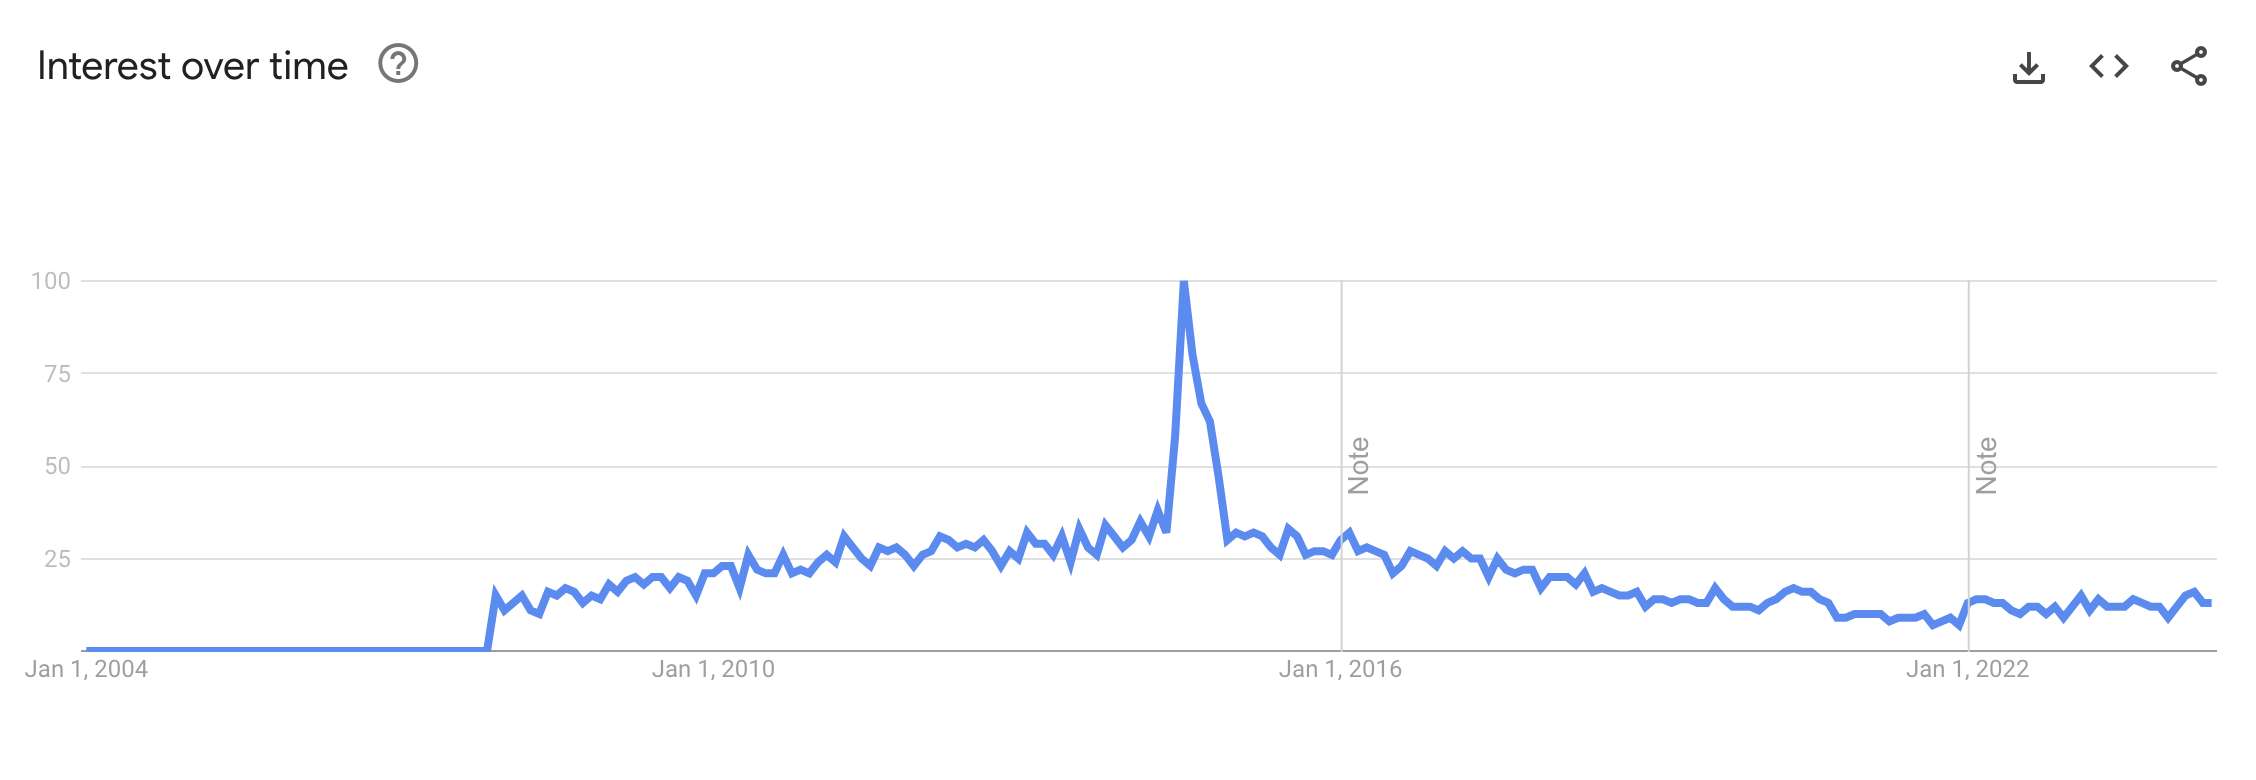 Google trends chart showing the demand for WordPerss Themes peak around 2014.